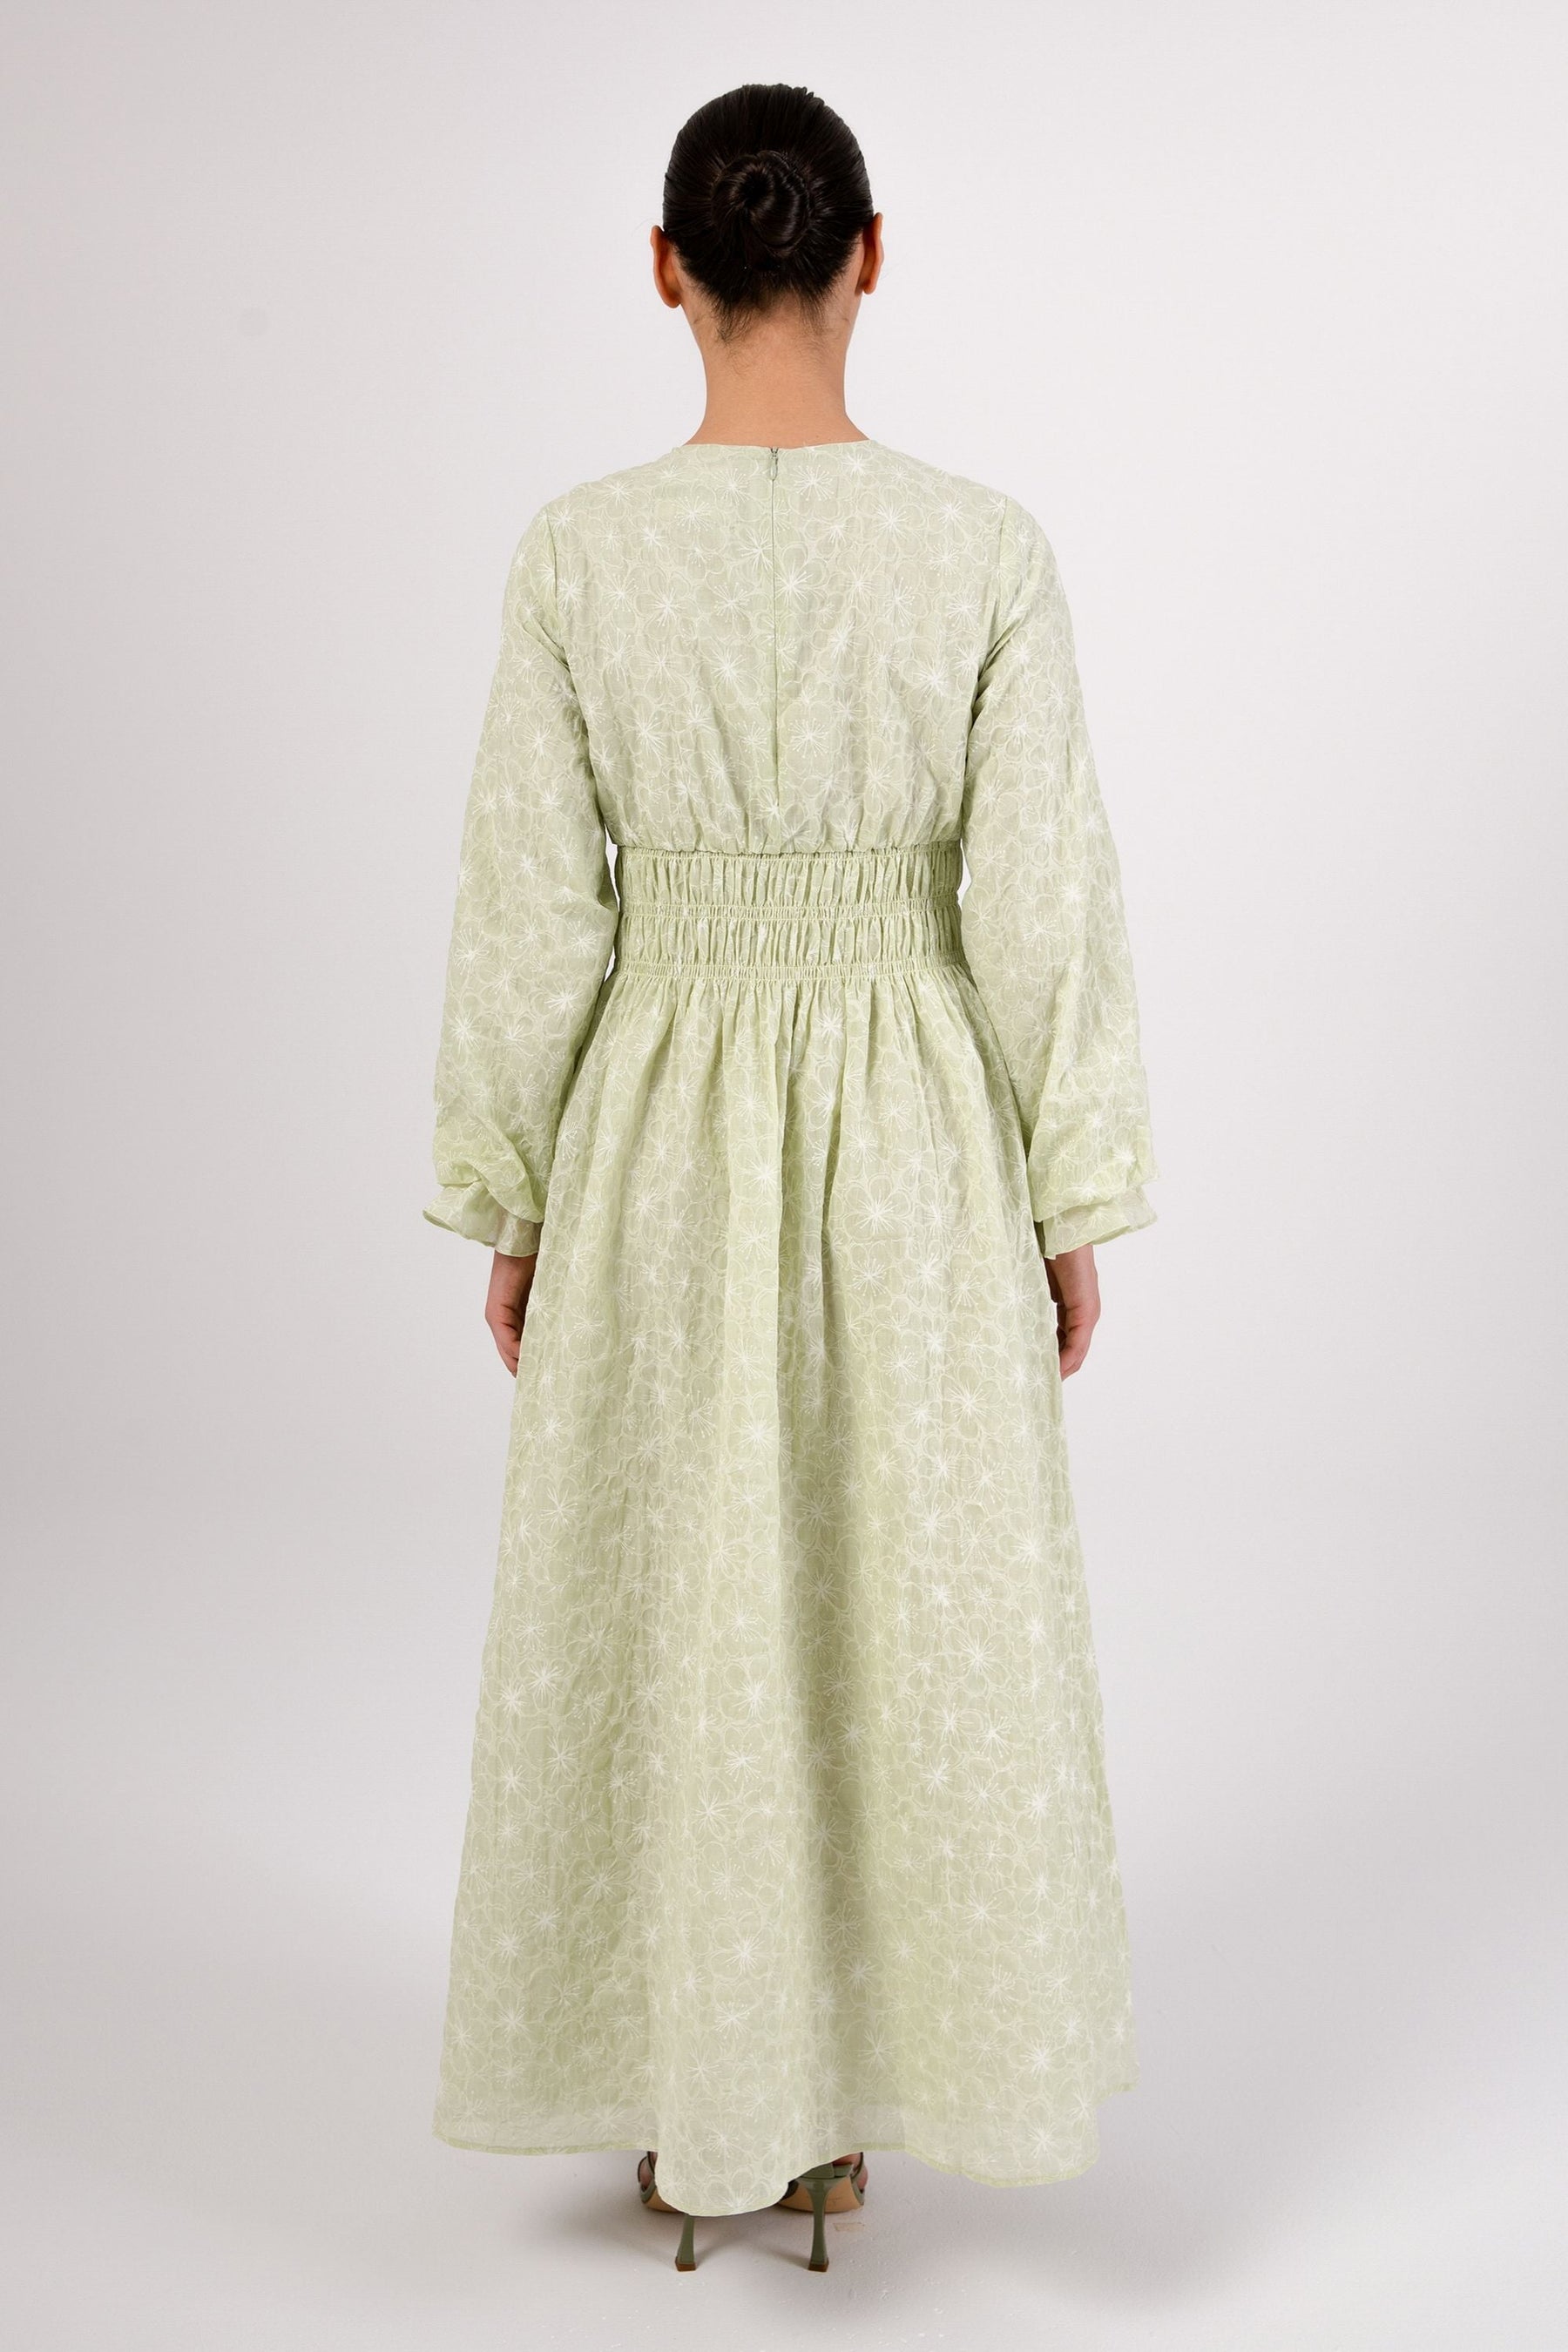 Marwa Green Floral Rouched Maxi Dress epschoolboard 